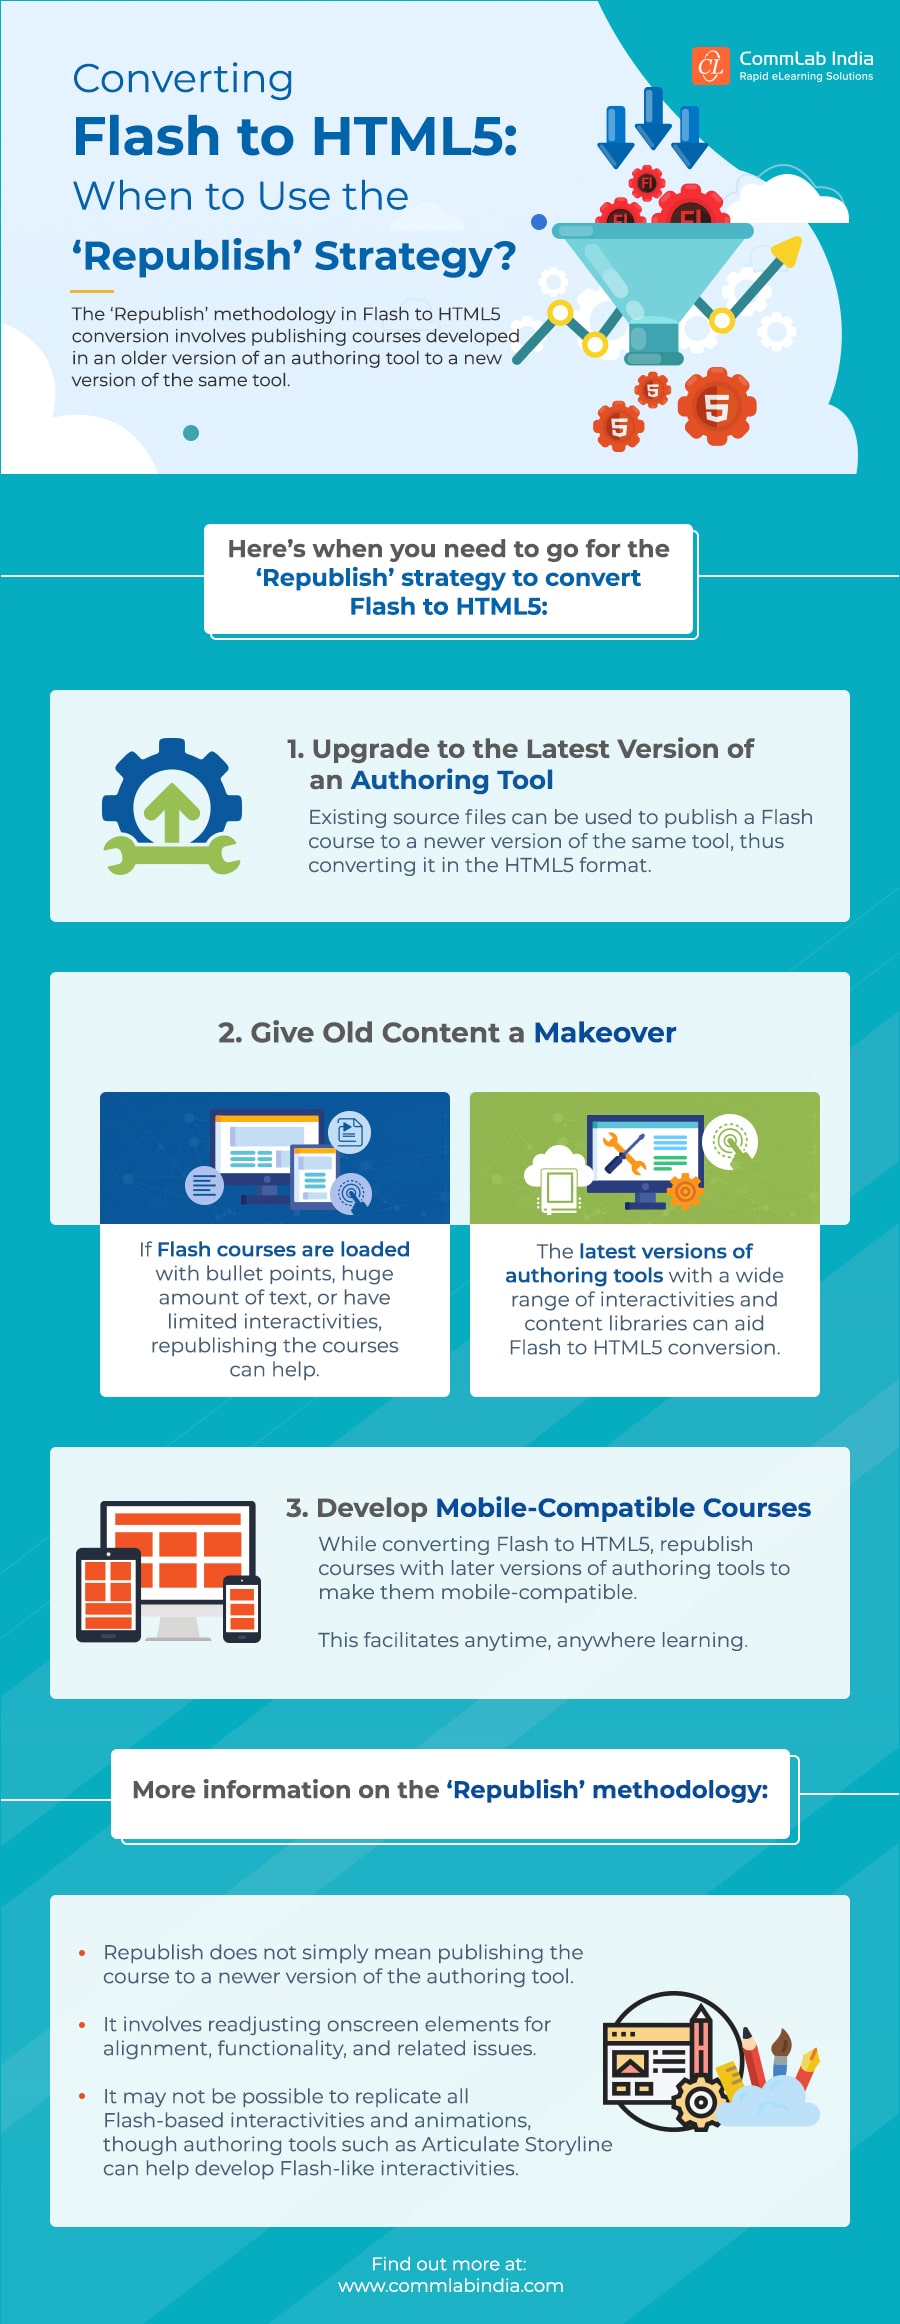 Converting Flash to HTML5: When to Use the ‘Republish’ Strategy [Infographic]